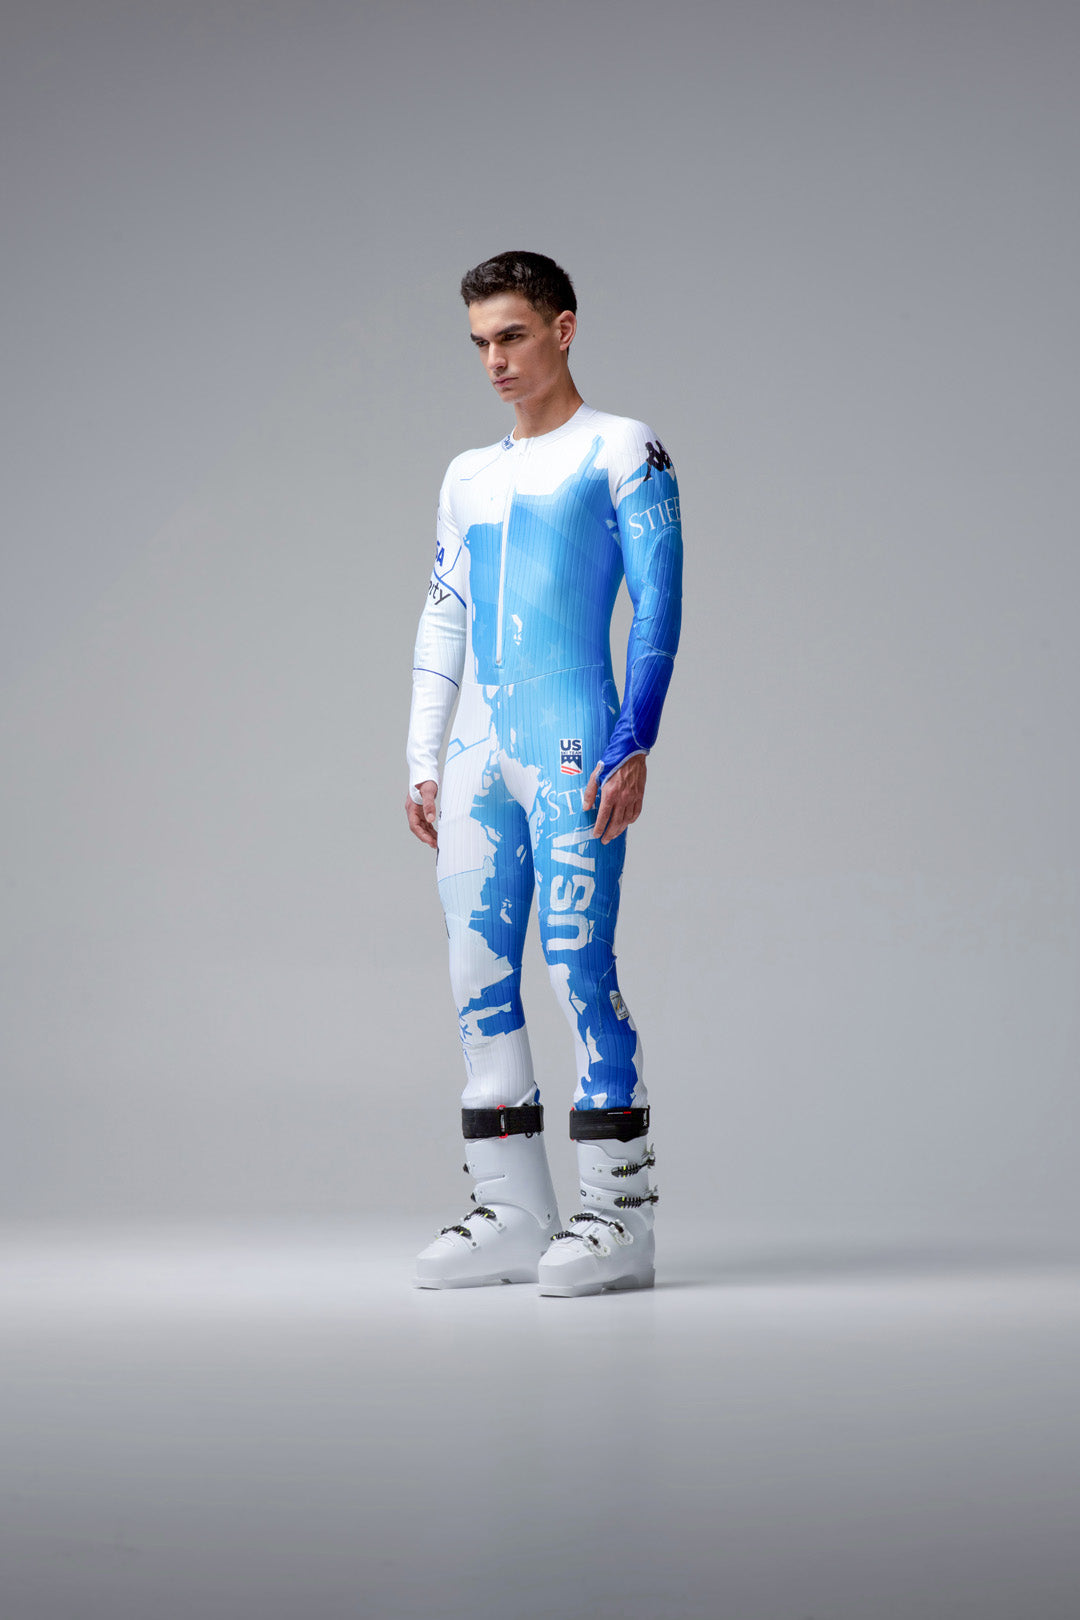 Male model wearing Kappa Protect Our Winter Collaboration Ski suit.